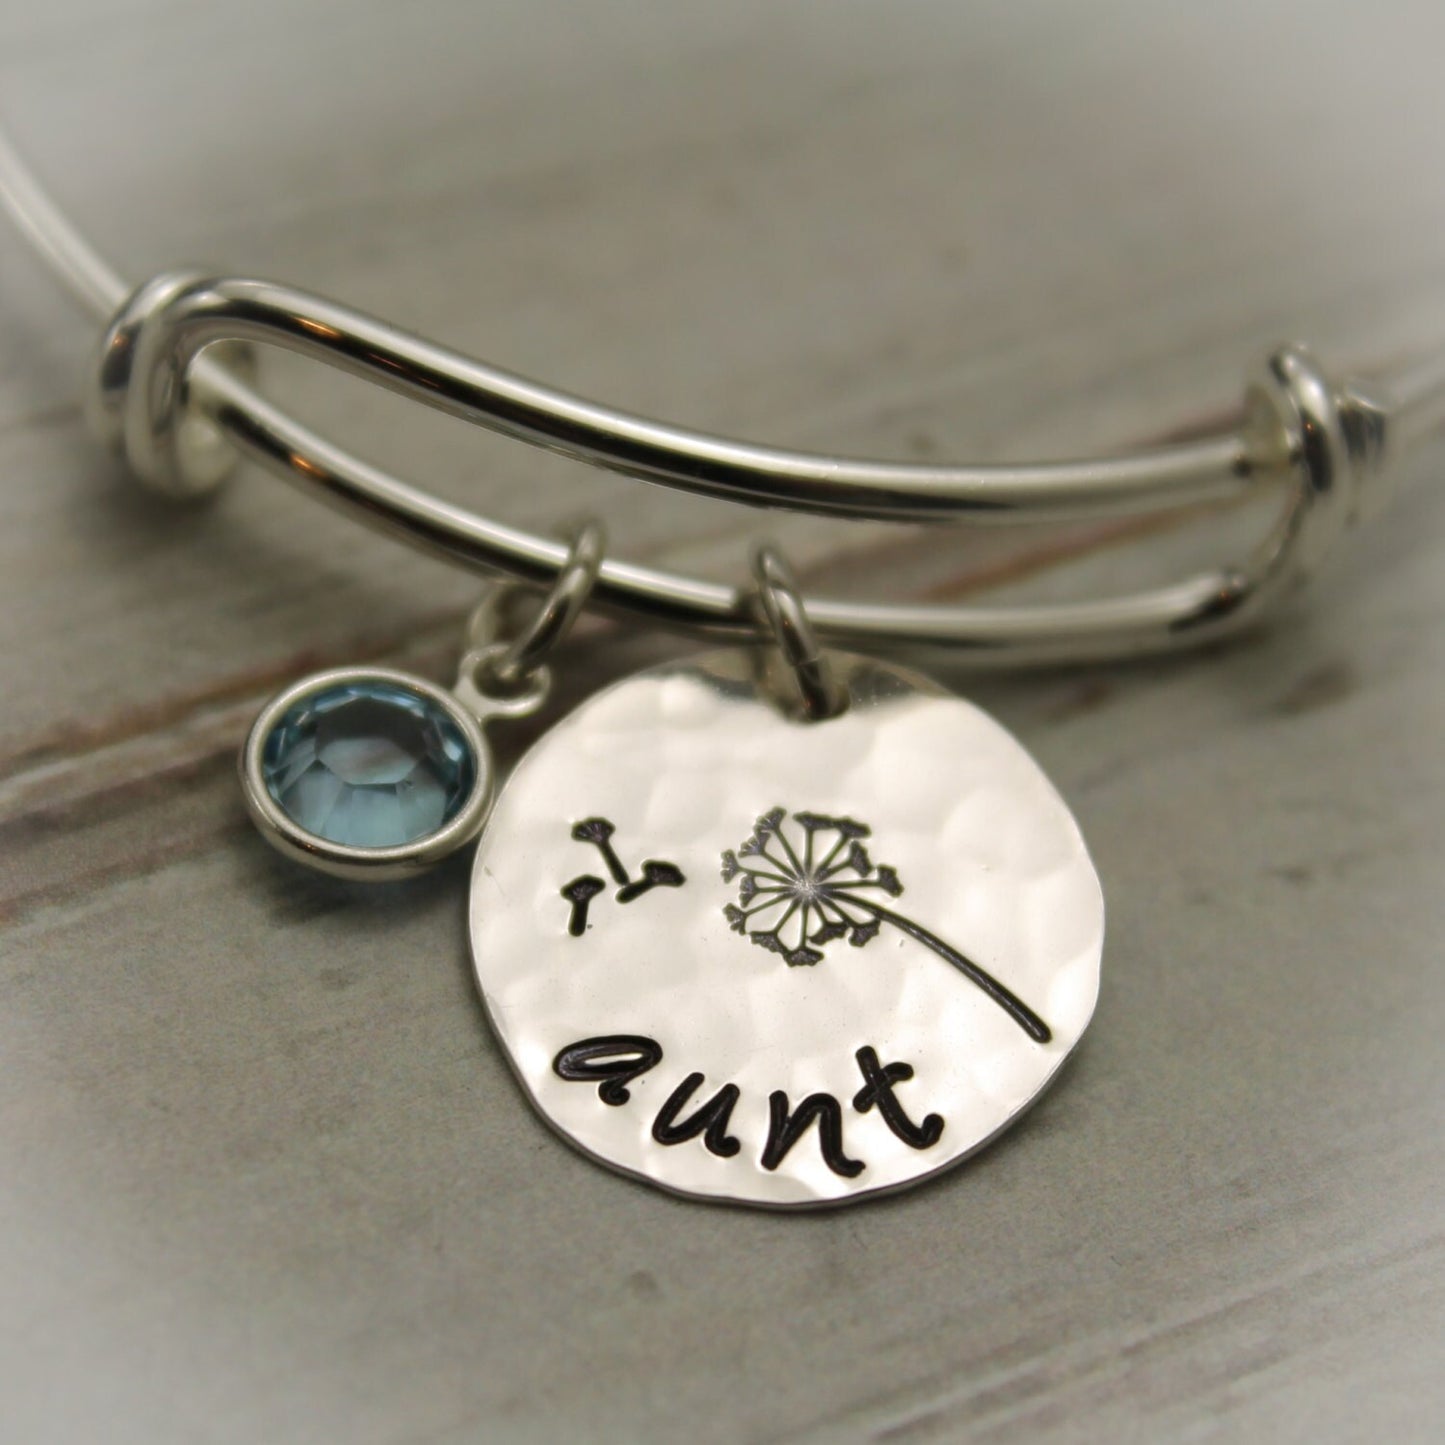 Personalized Aunt Bangle Bracelet, Personalized Auntie Gift, Aunt Bracelet, Gifts for Aunts, Birthstone Jewelry, Personalized, Hand Stamped